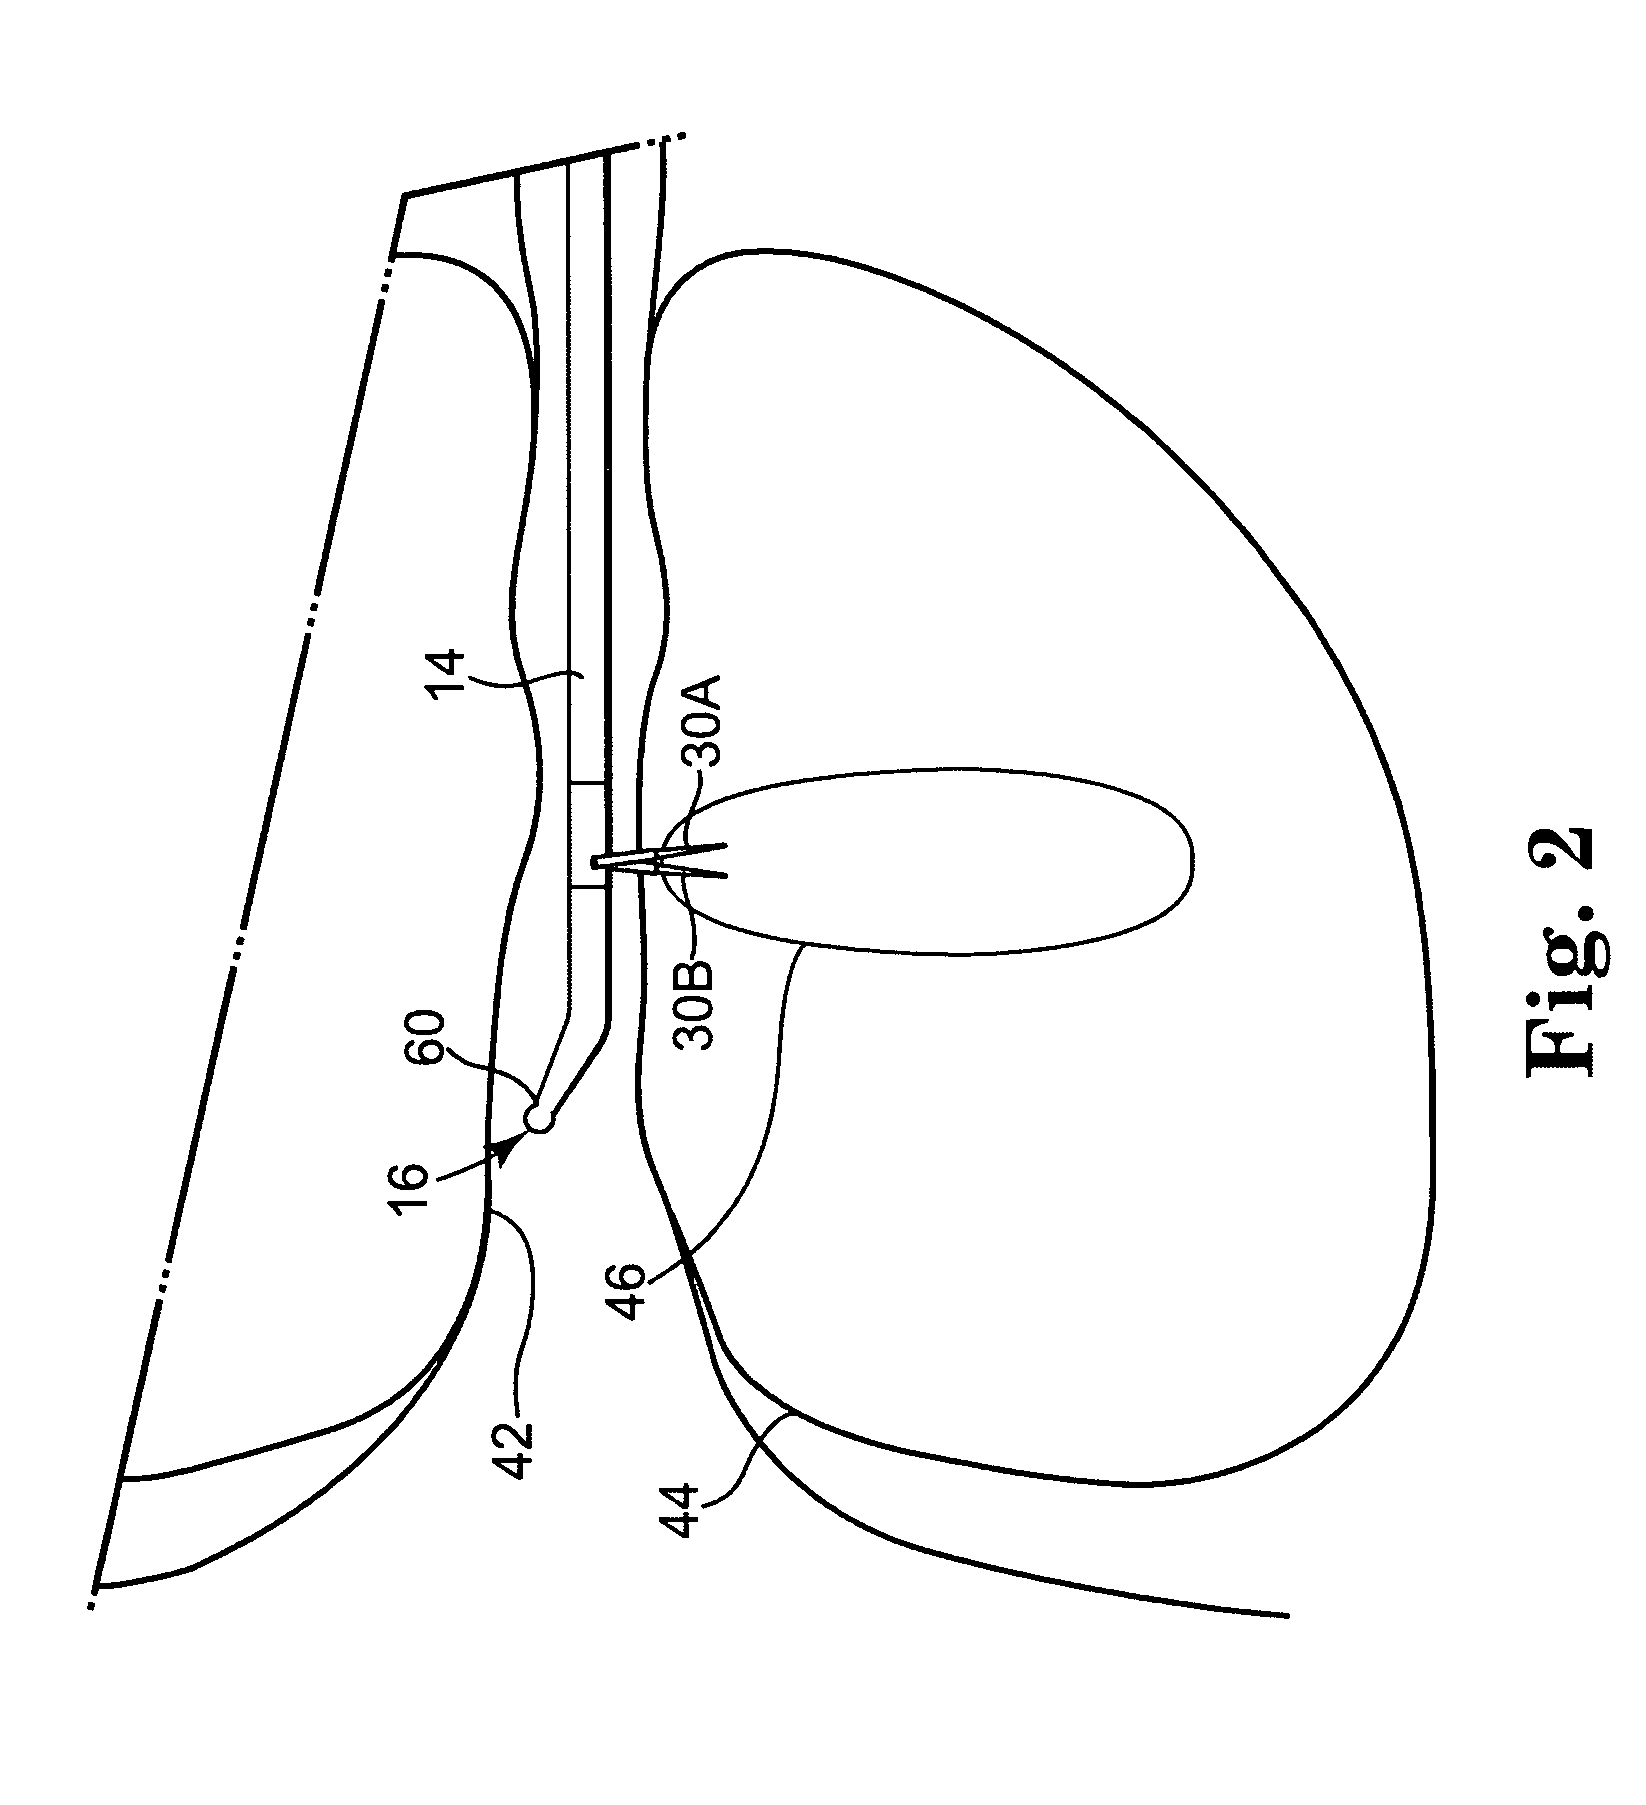 Transurethral needle ablation system with flexible catheter tip